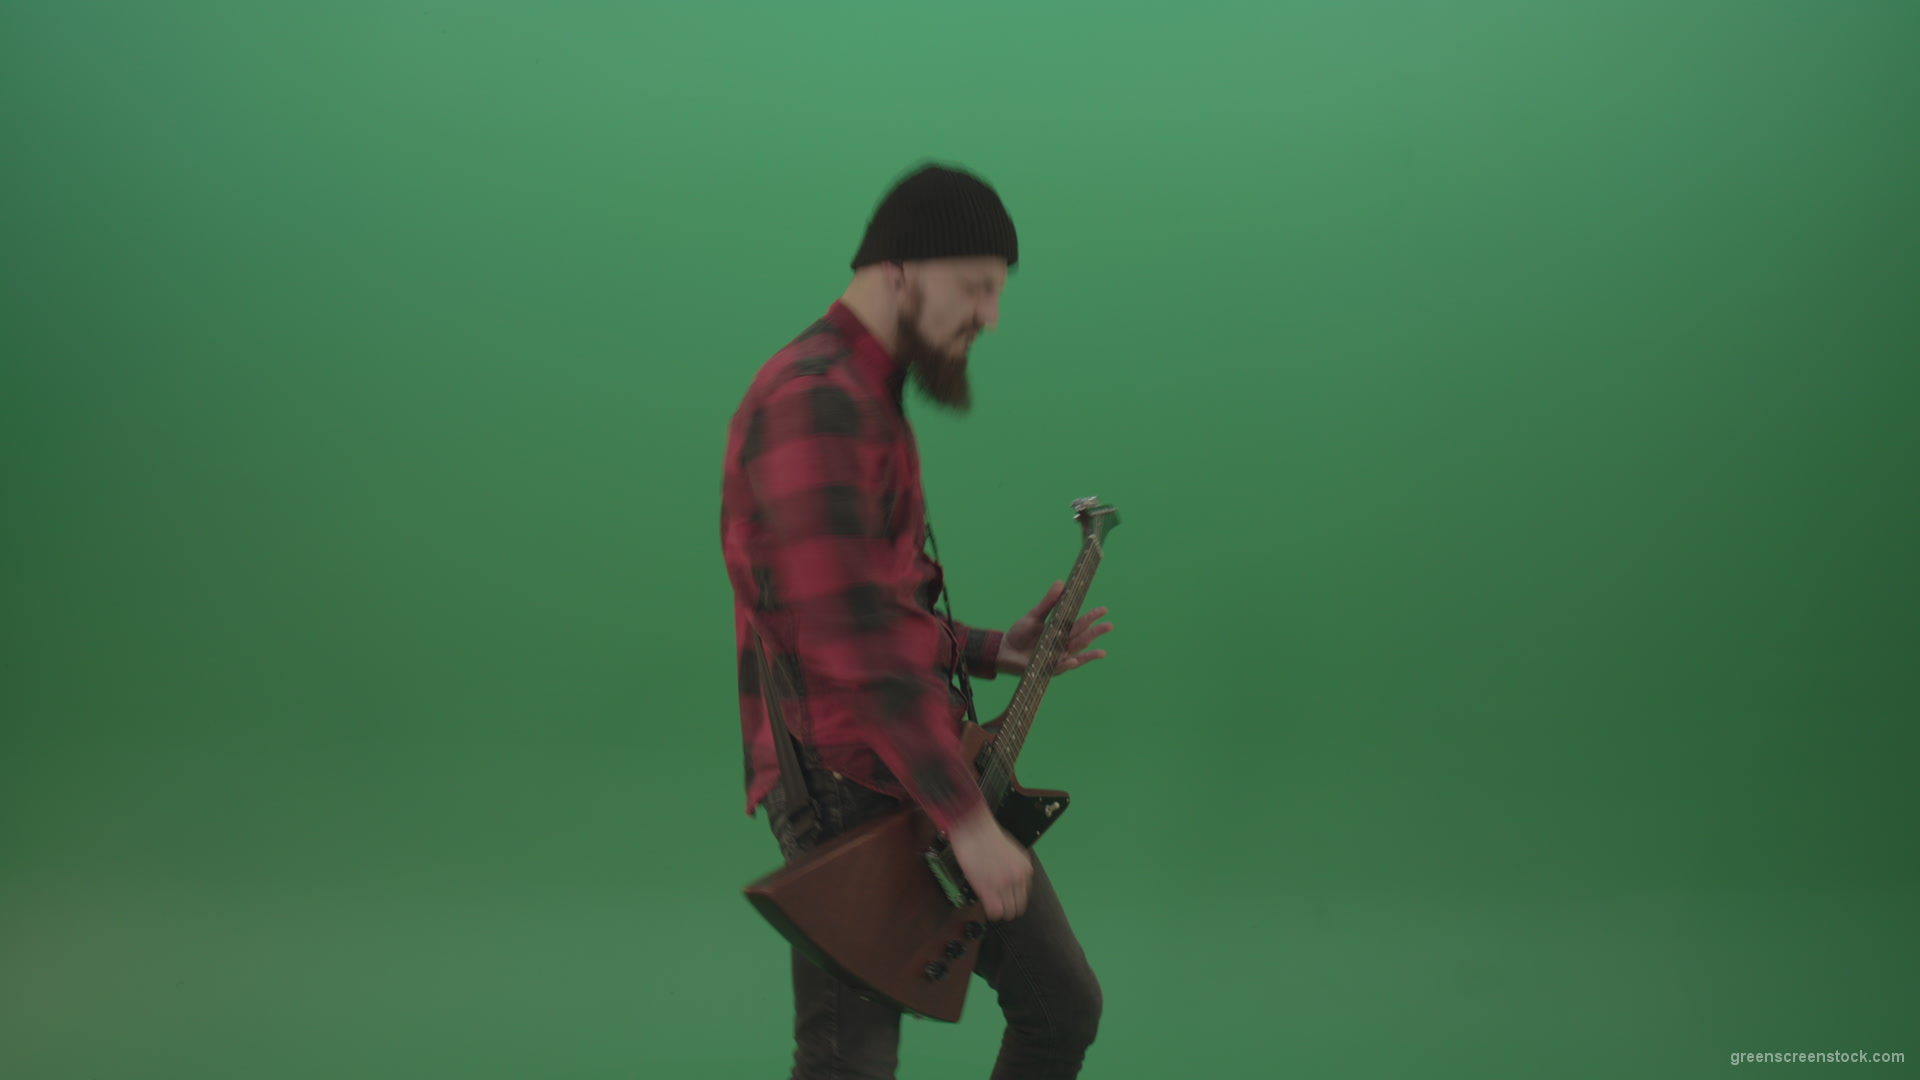 Young-man-with-beard-play-hardcore-music-on-guitar-in-side-view-on-green-screen-chromakey-background_005 Green Screen Stock